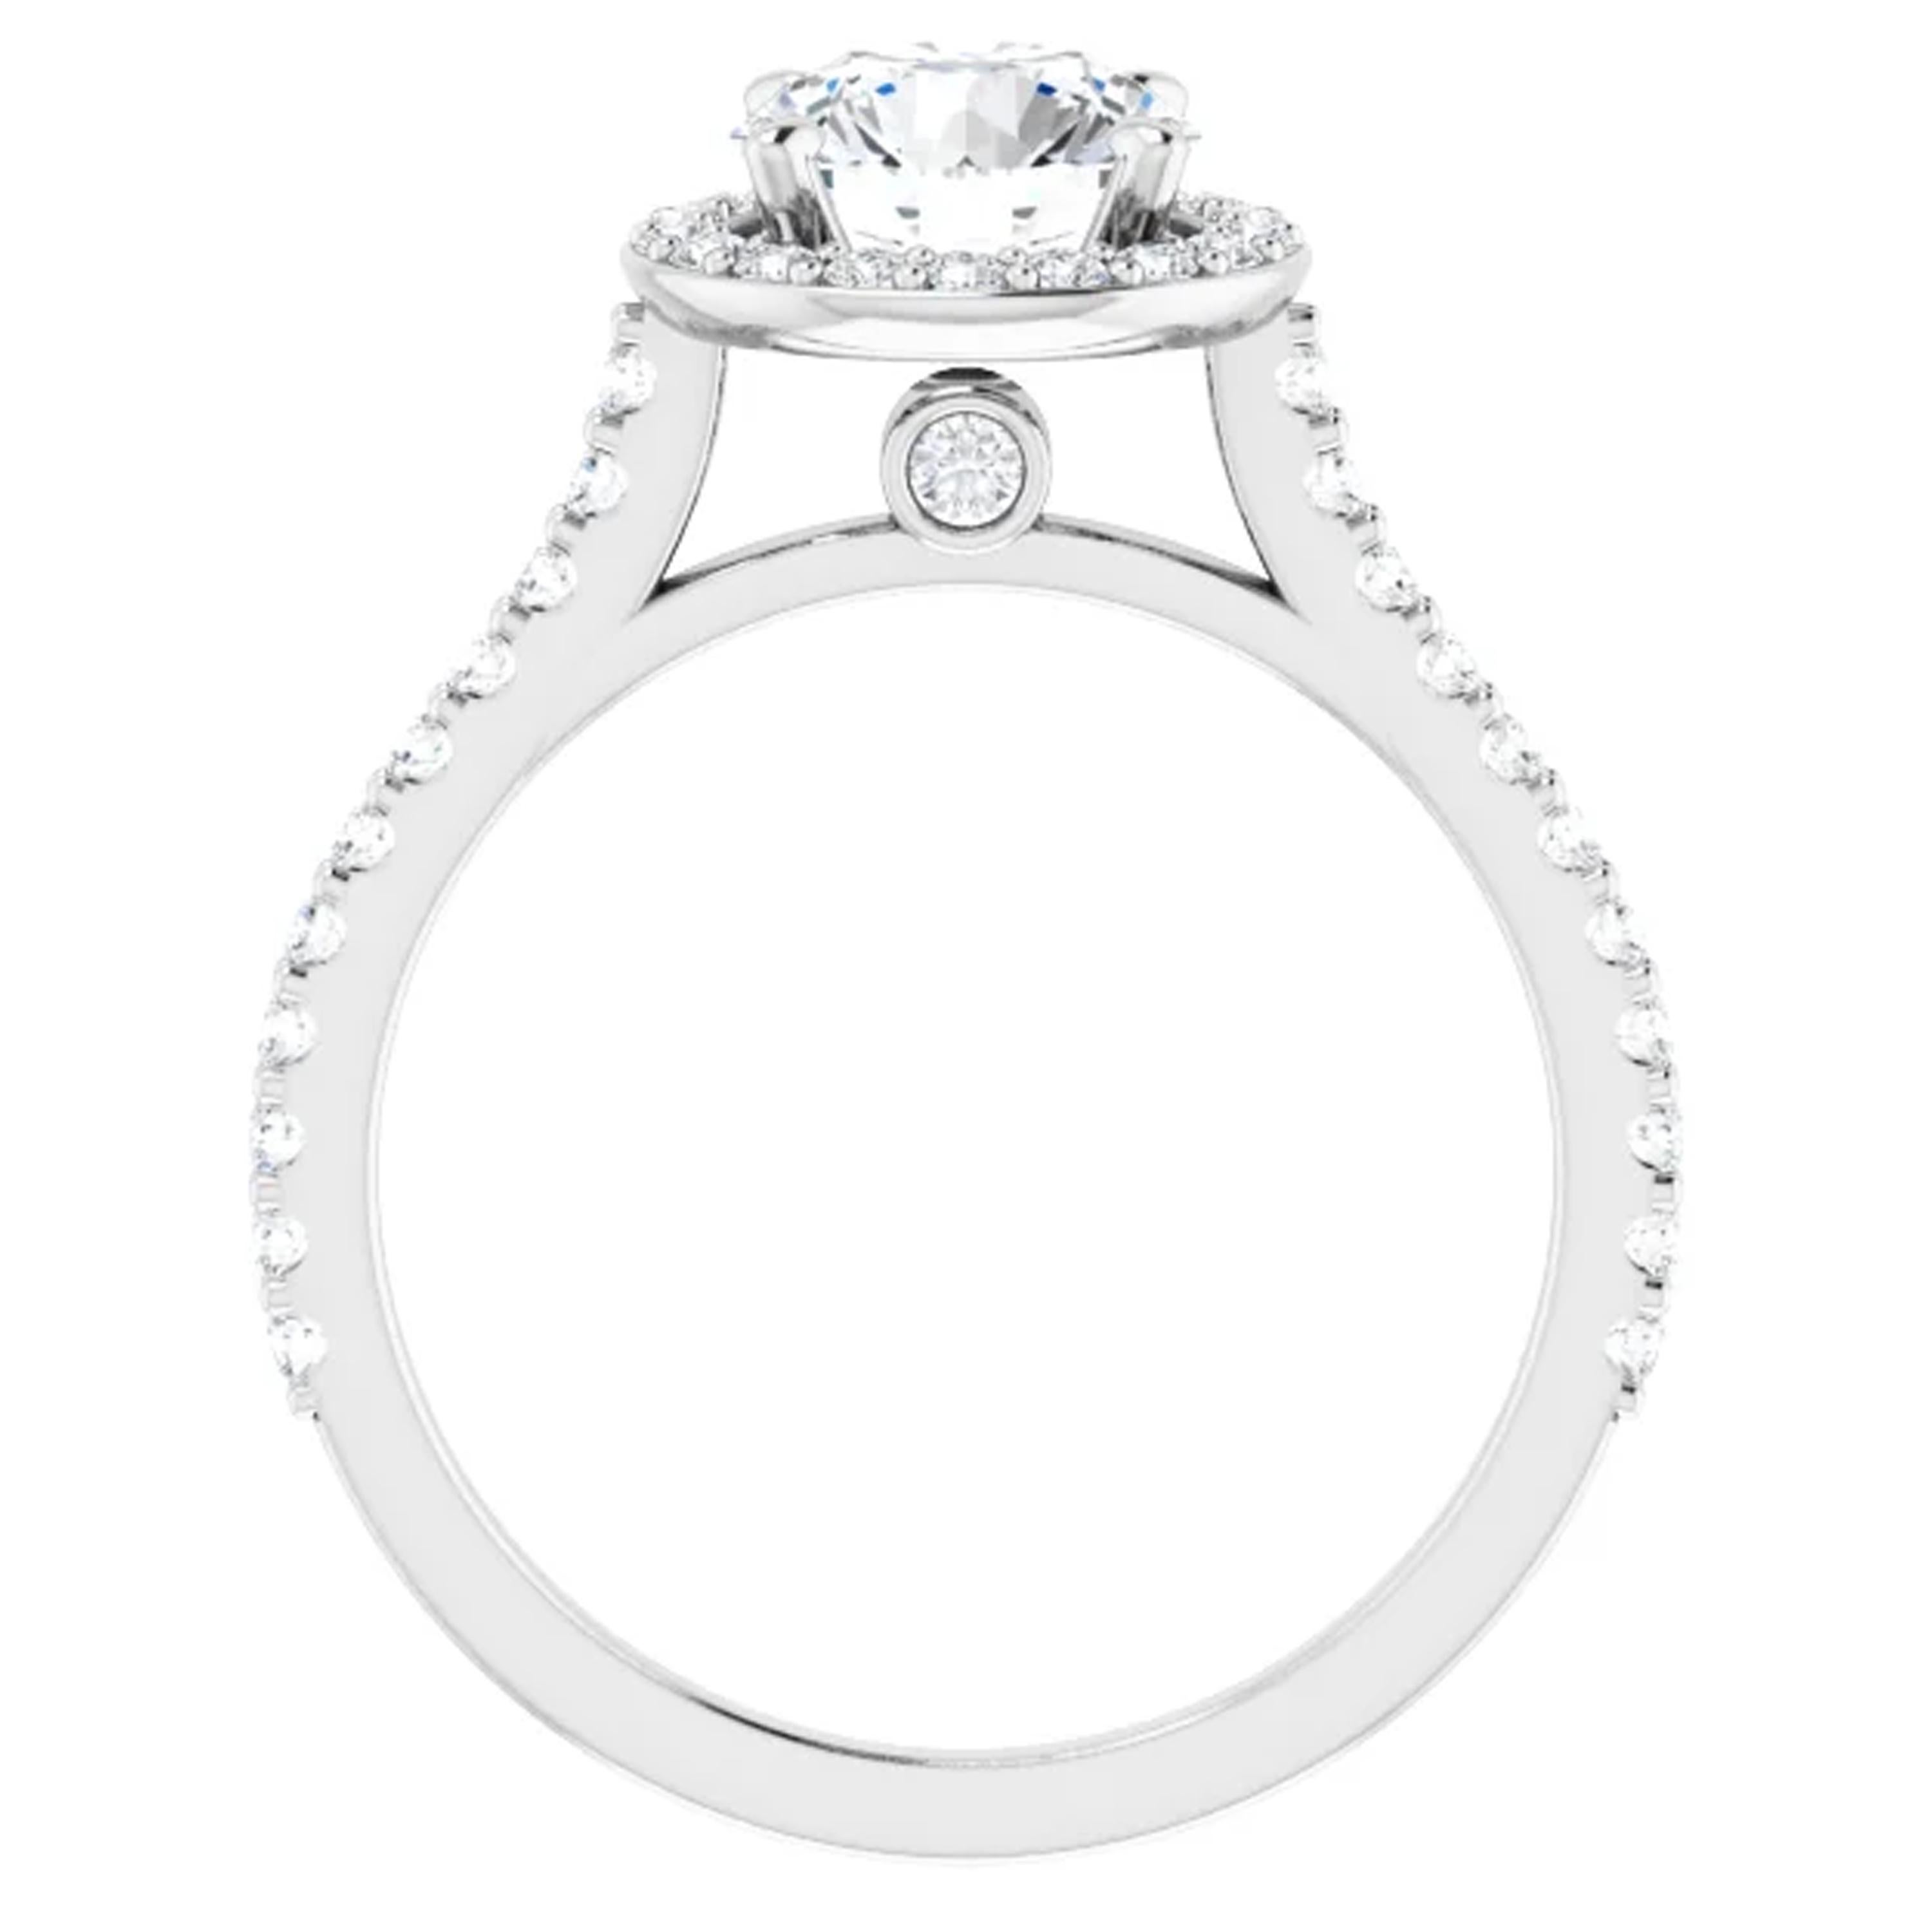 Showcasing two natural bezel set diamonds in the gallery, the cathedral diamond accented arches of this engagement ring rise as they reach the GIA certified center diamond. Additional diamonds amplify the round brilliant center diamond as they